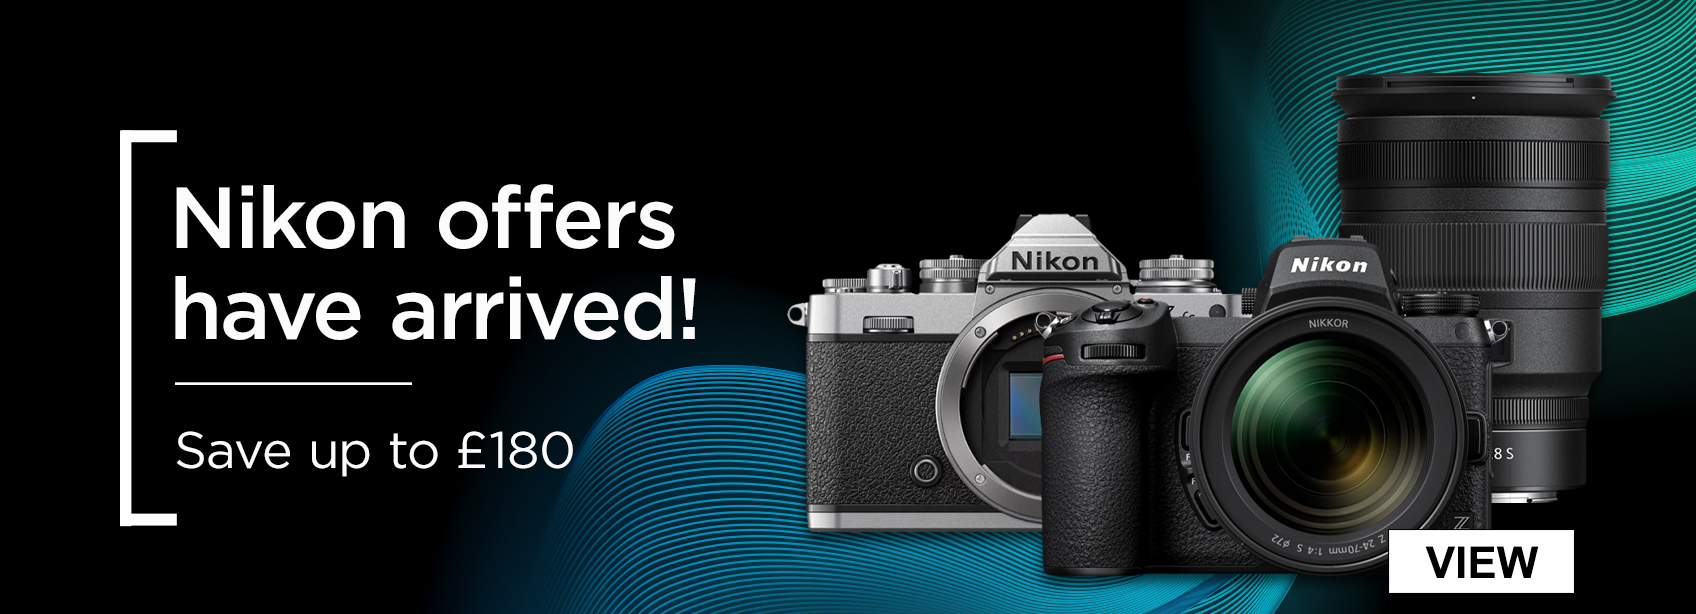 Nikon offers have arrived! Save up to £180